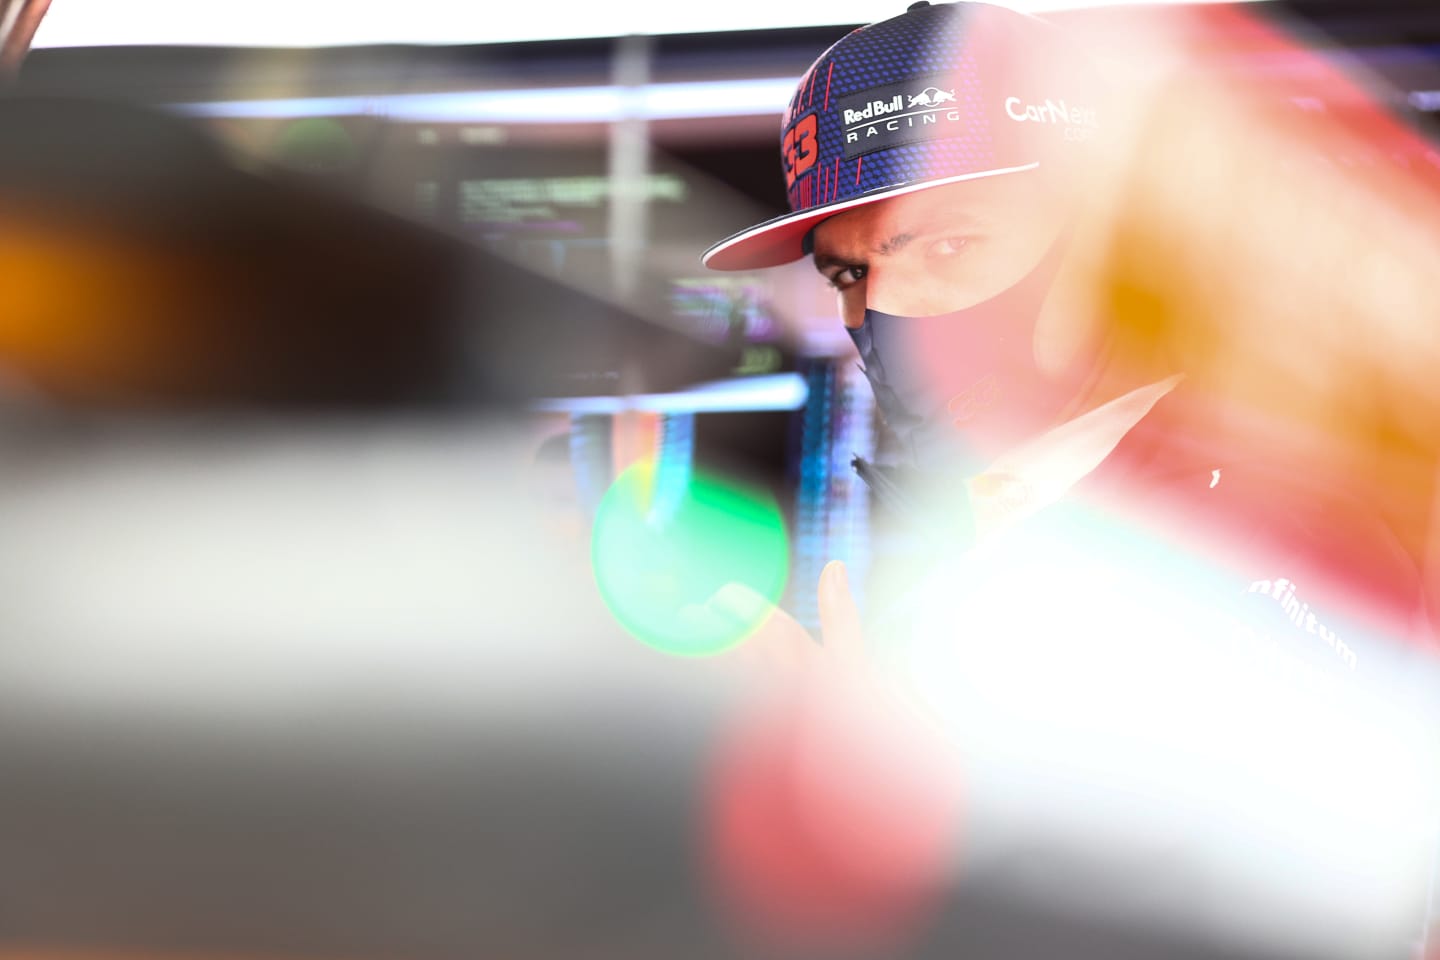 ISTANBUL, TURKEY - OCTOBER 09: Max Verstappen of Netherlands and Red Bull Racing looks on in the garage during final practice ahead of the F1 Grand Prix of Turkey at Intercity Istanbul Park on October 09, 2021 in Istanbul, Turkey. (Photo by Mark Thompson/Getty Images)